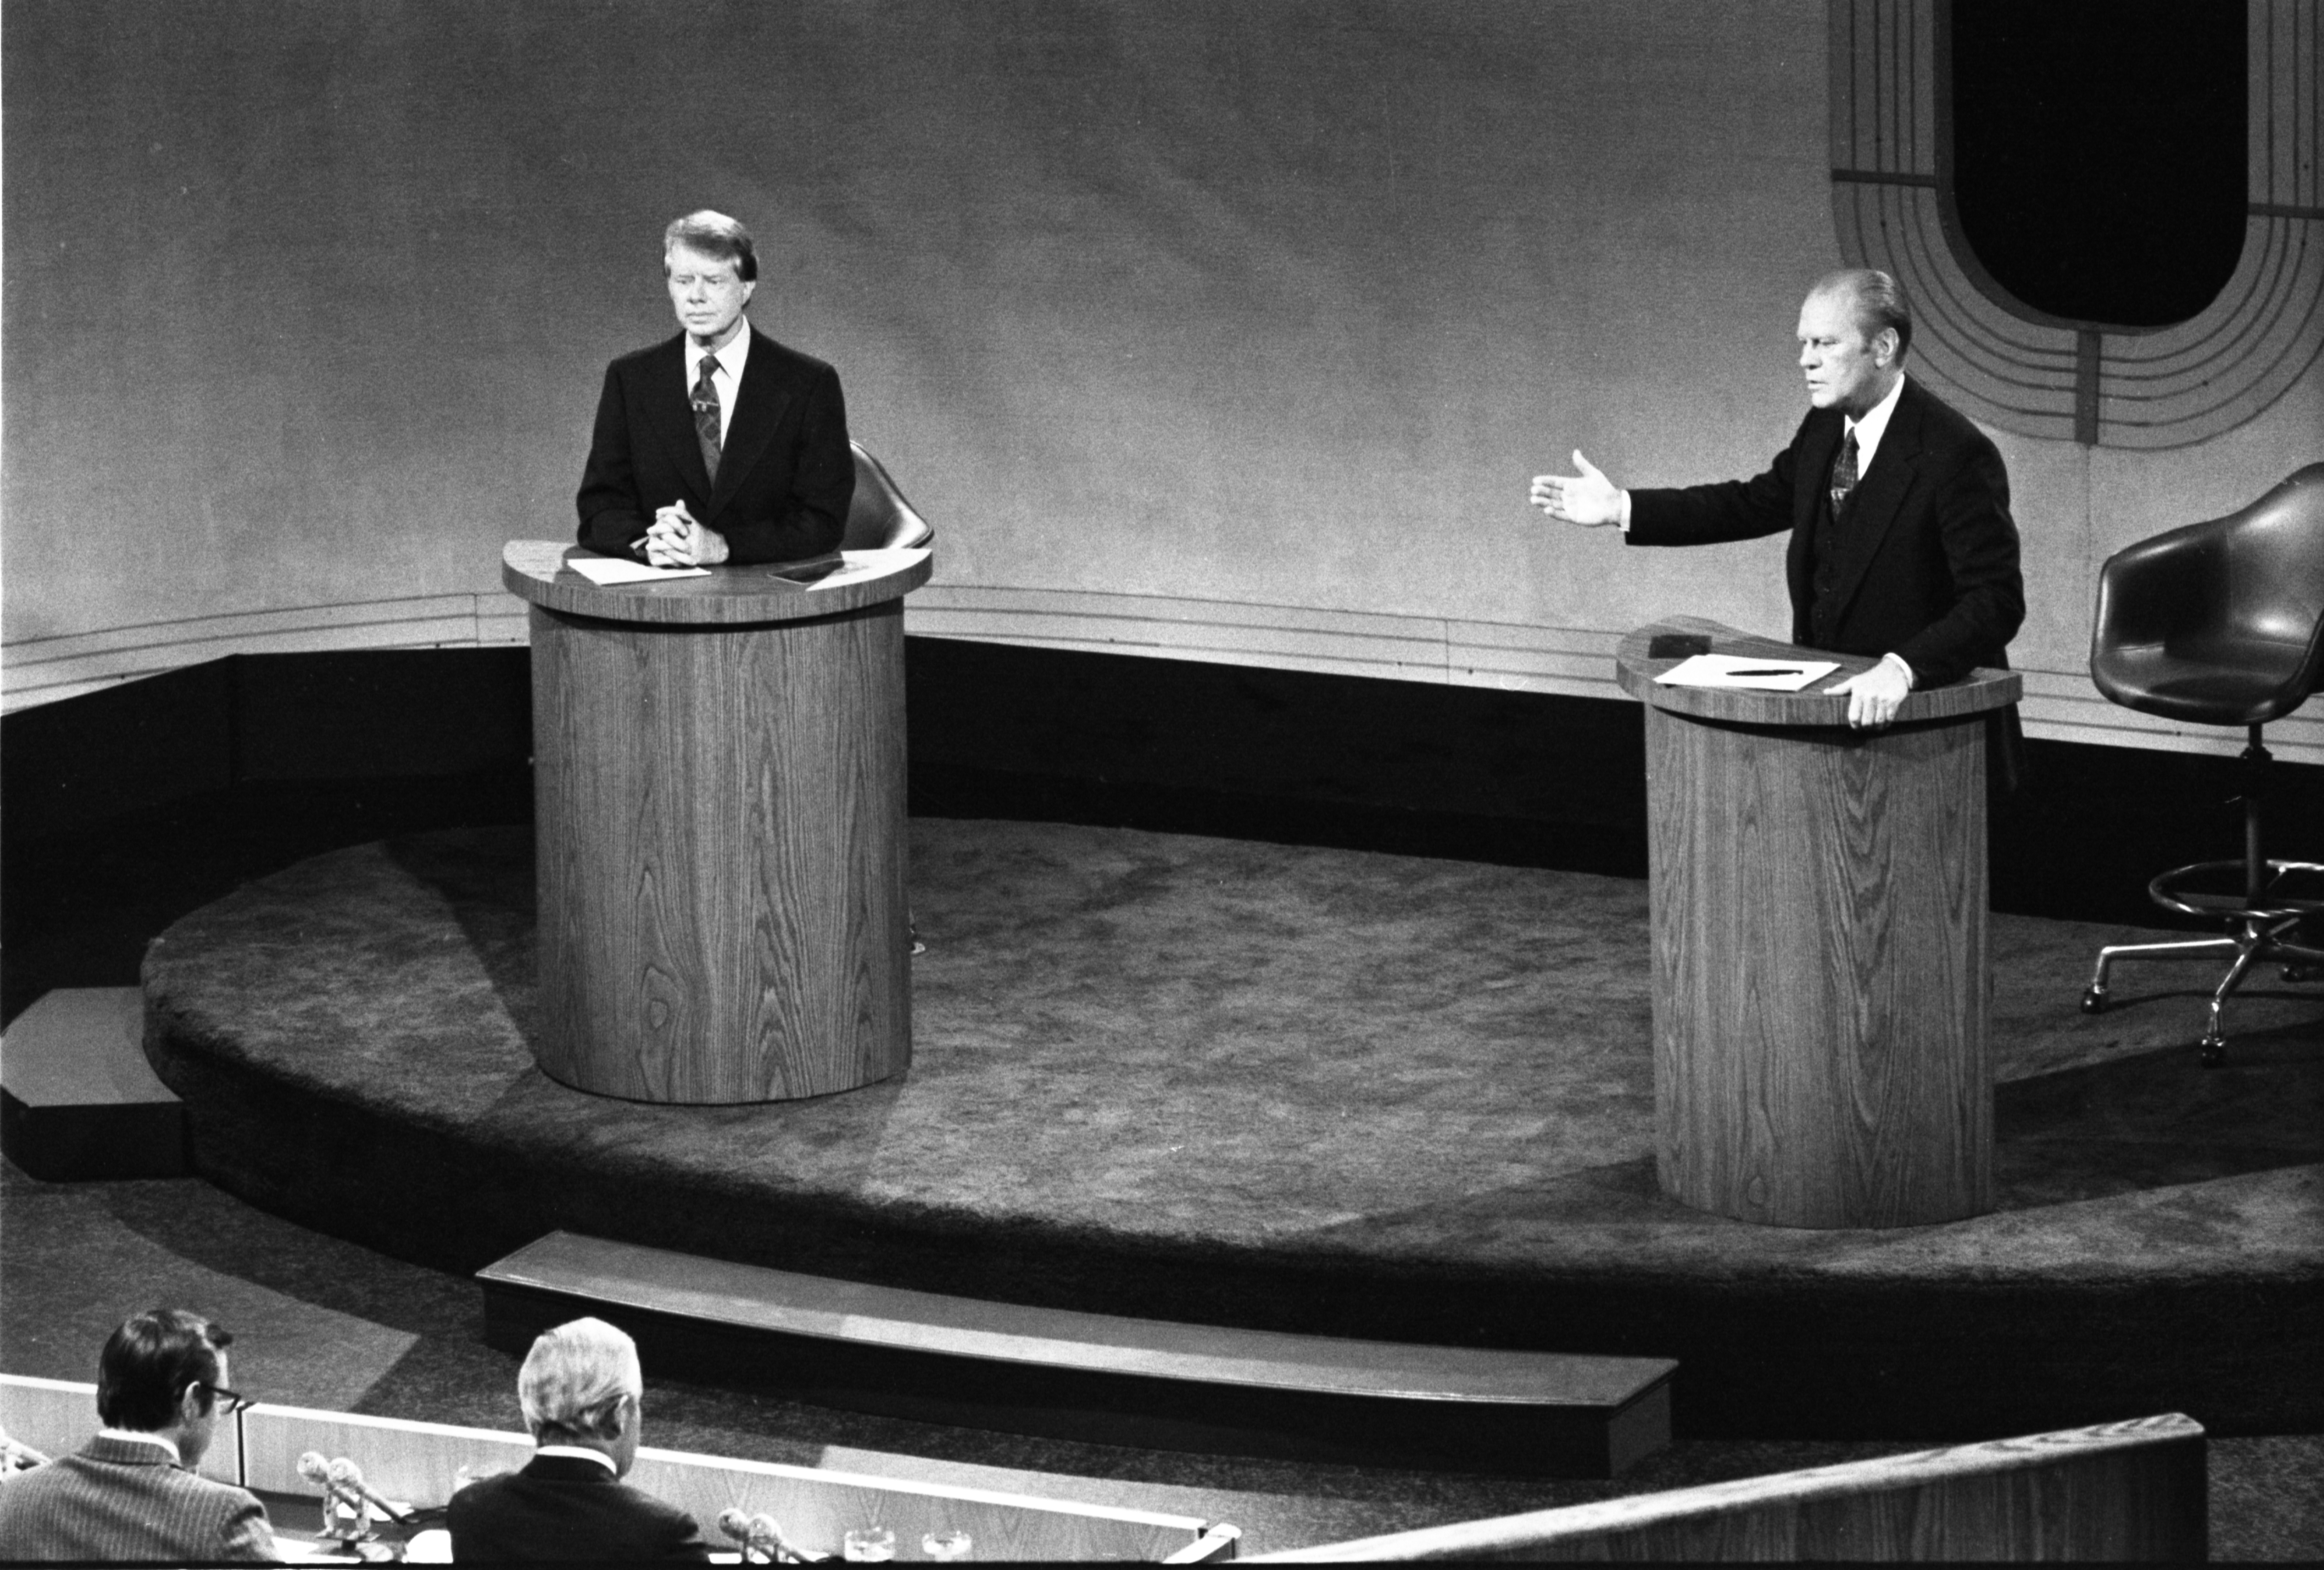 President Ford and Jimmy Carter meet at the Walnut Street Theater in Philadelphia to debate domestic policy during the first of the three Ford-Carter Debates. 